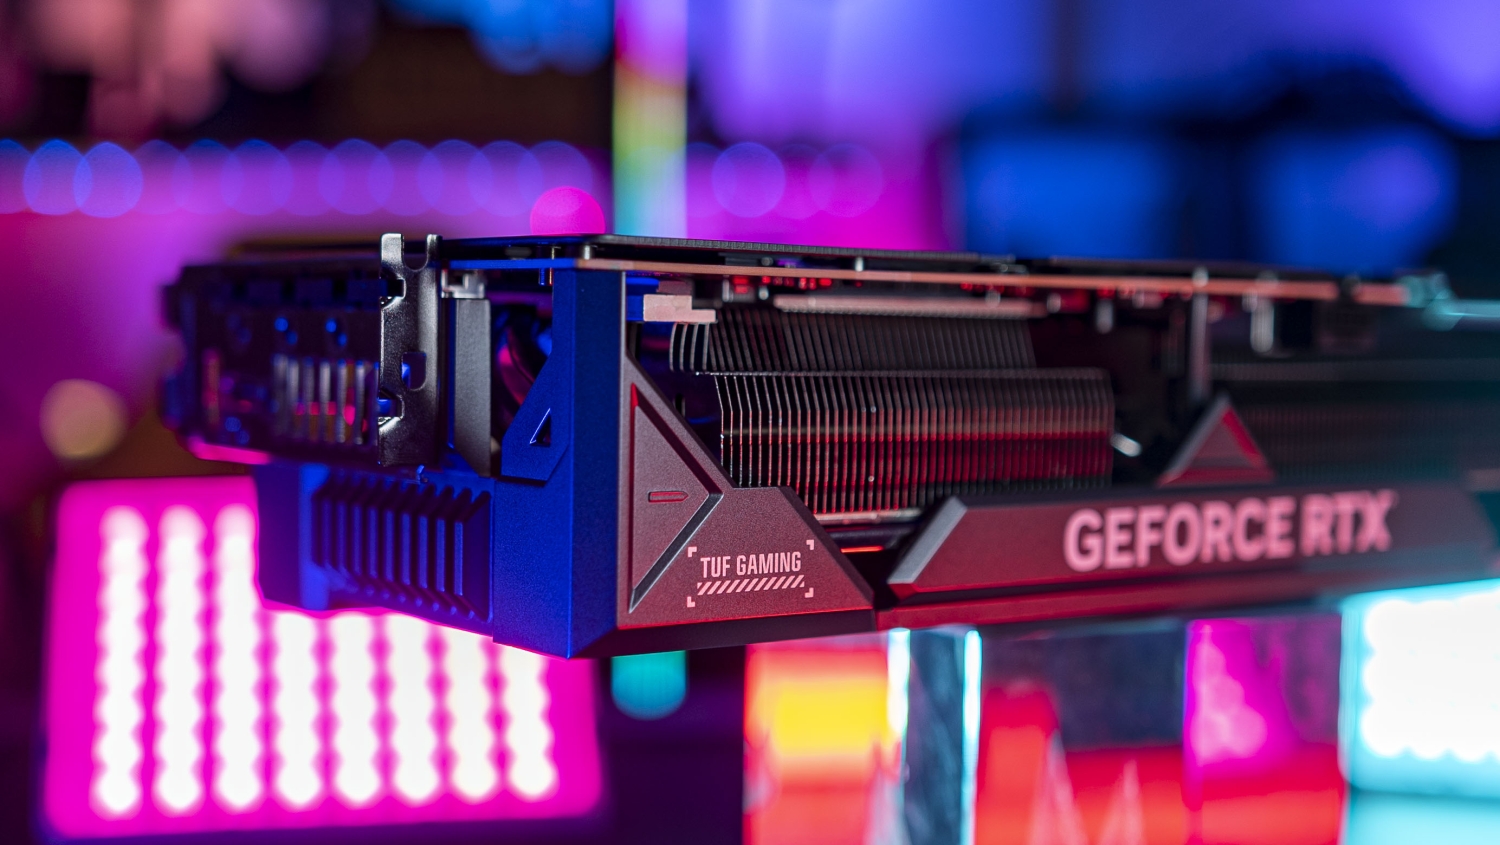 ASUS TUF Gaming GeForce RTX 4080 16GB OC Edition Review - New